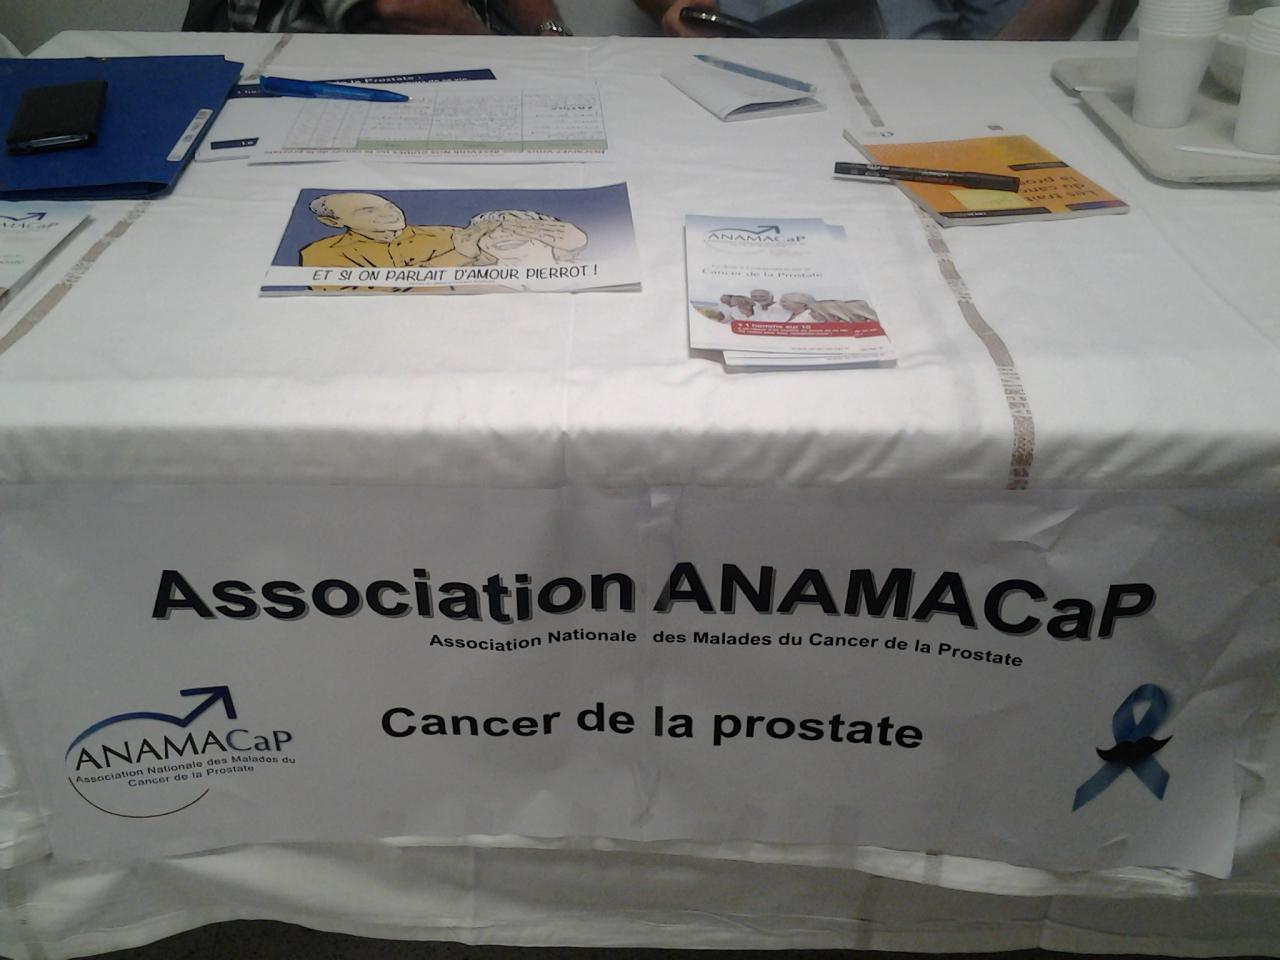 Le stand ANAMACaP.